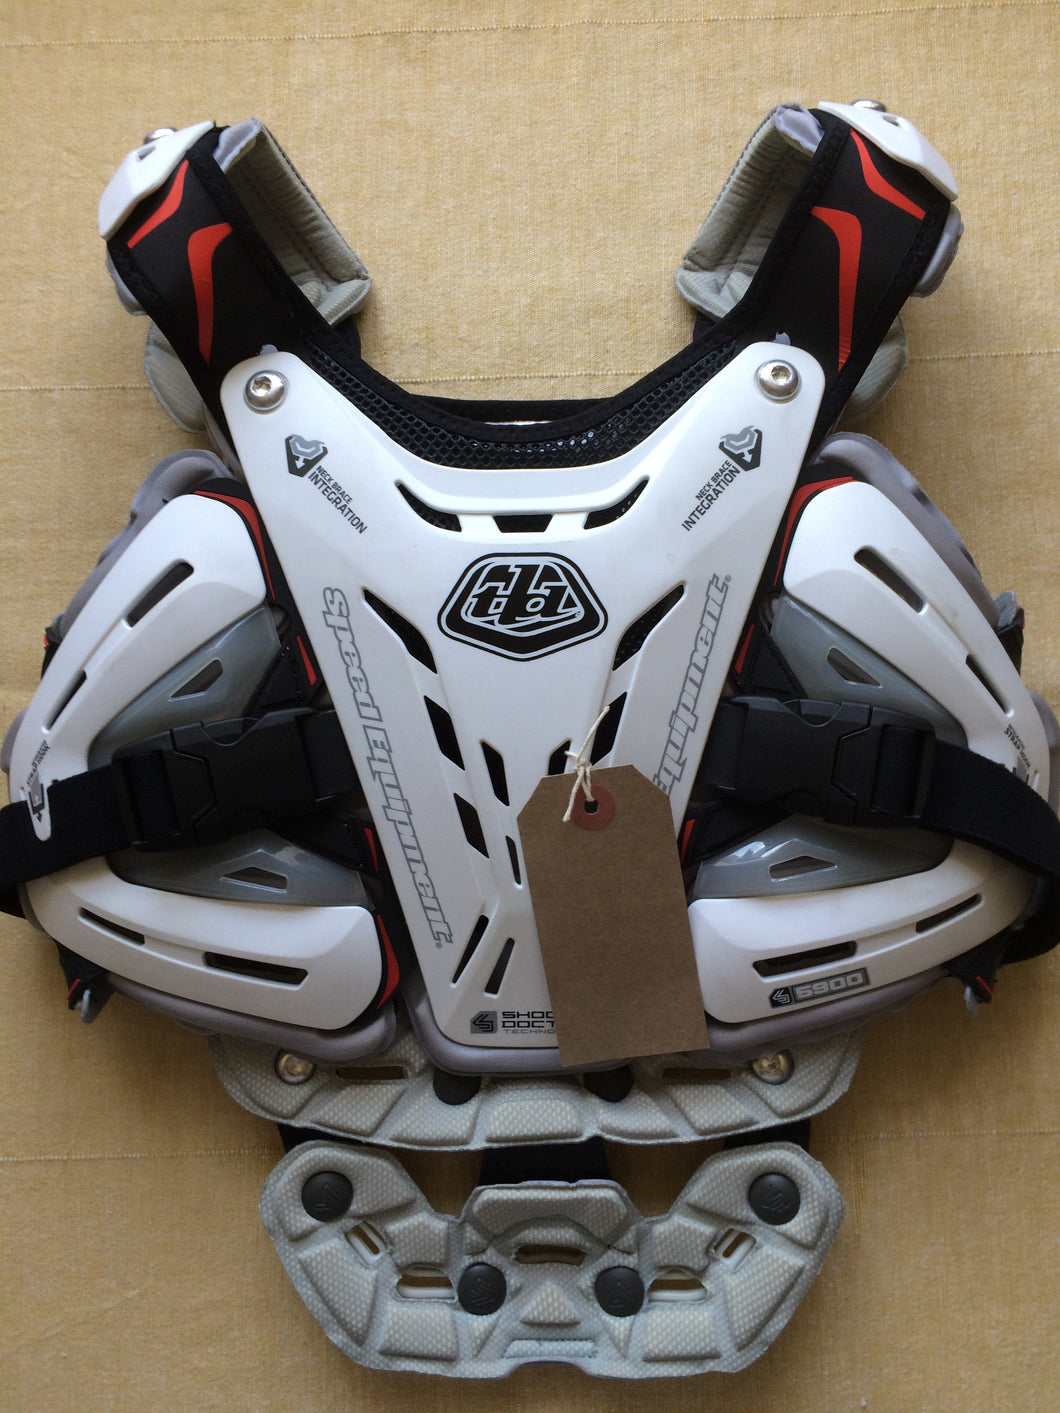 ARMOUR : Troy Lee Designs Shock Doctor CP5900 Youth Chest Protector